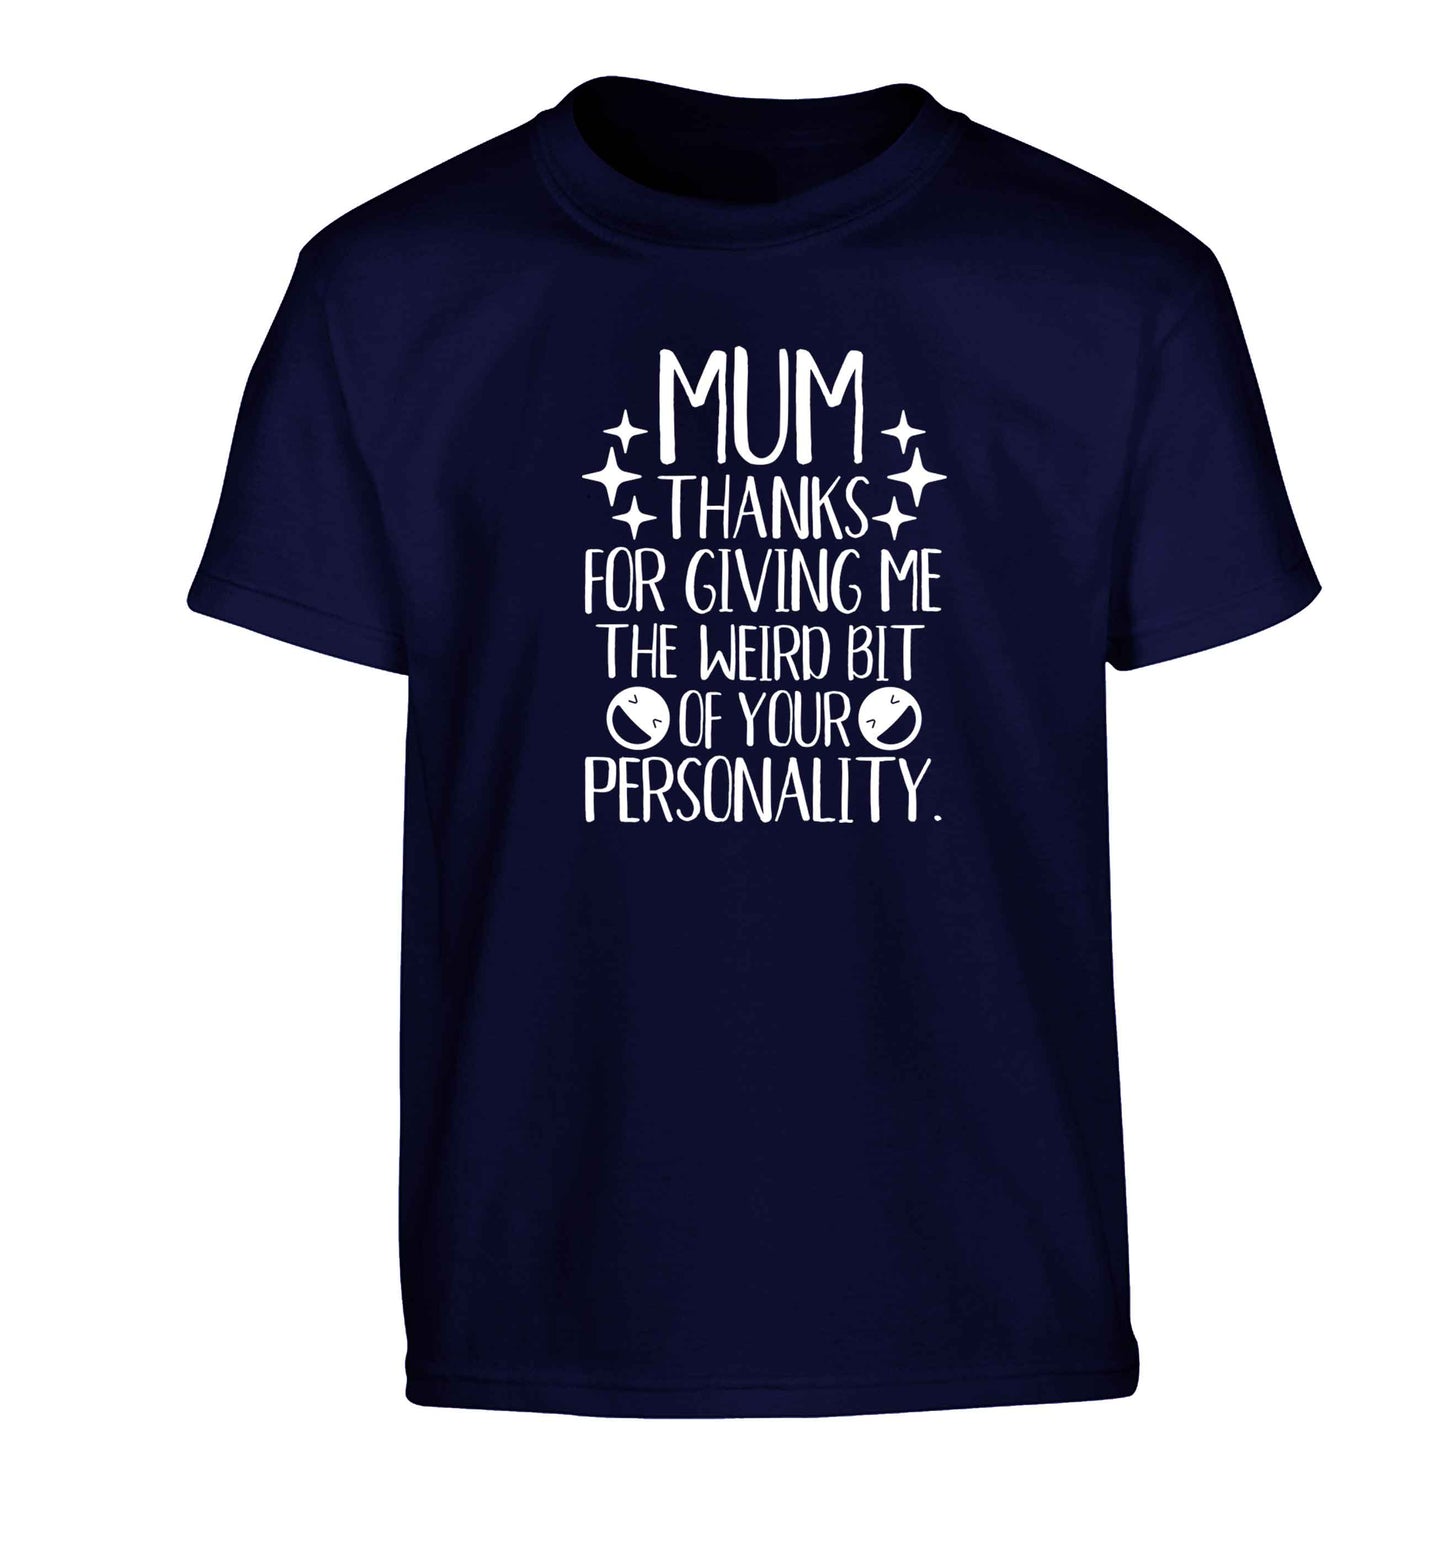 Mum, I love you more than halloumi and if you know me at all you know how deep that is Children's navy Tshirt 12-13 Years